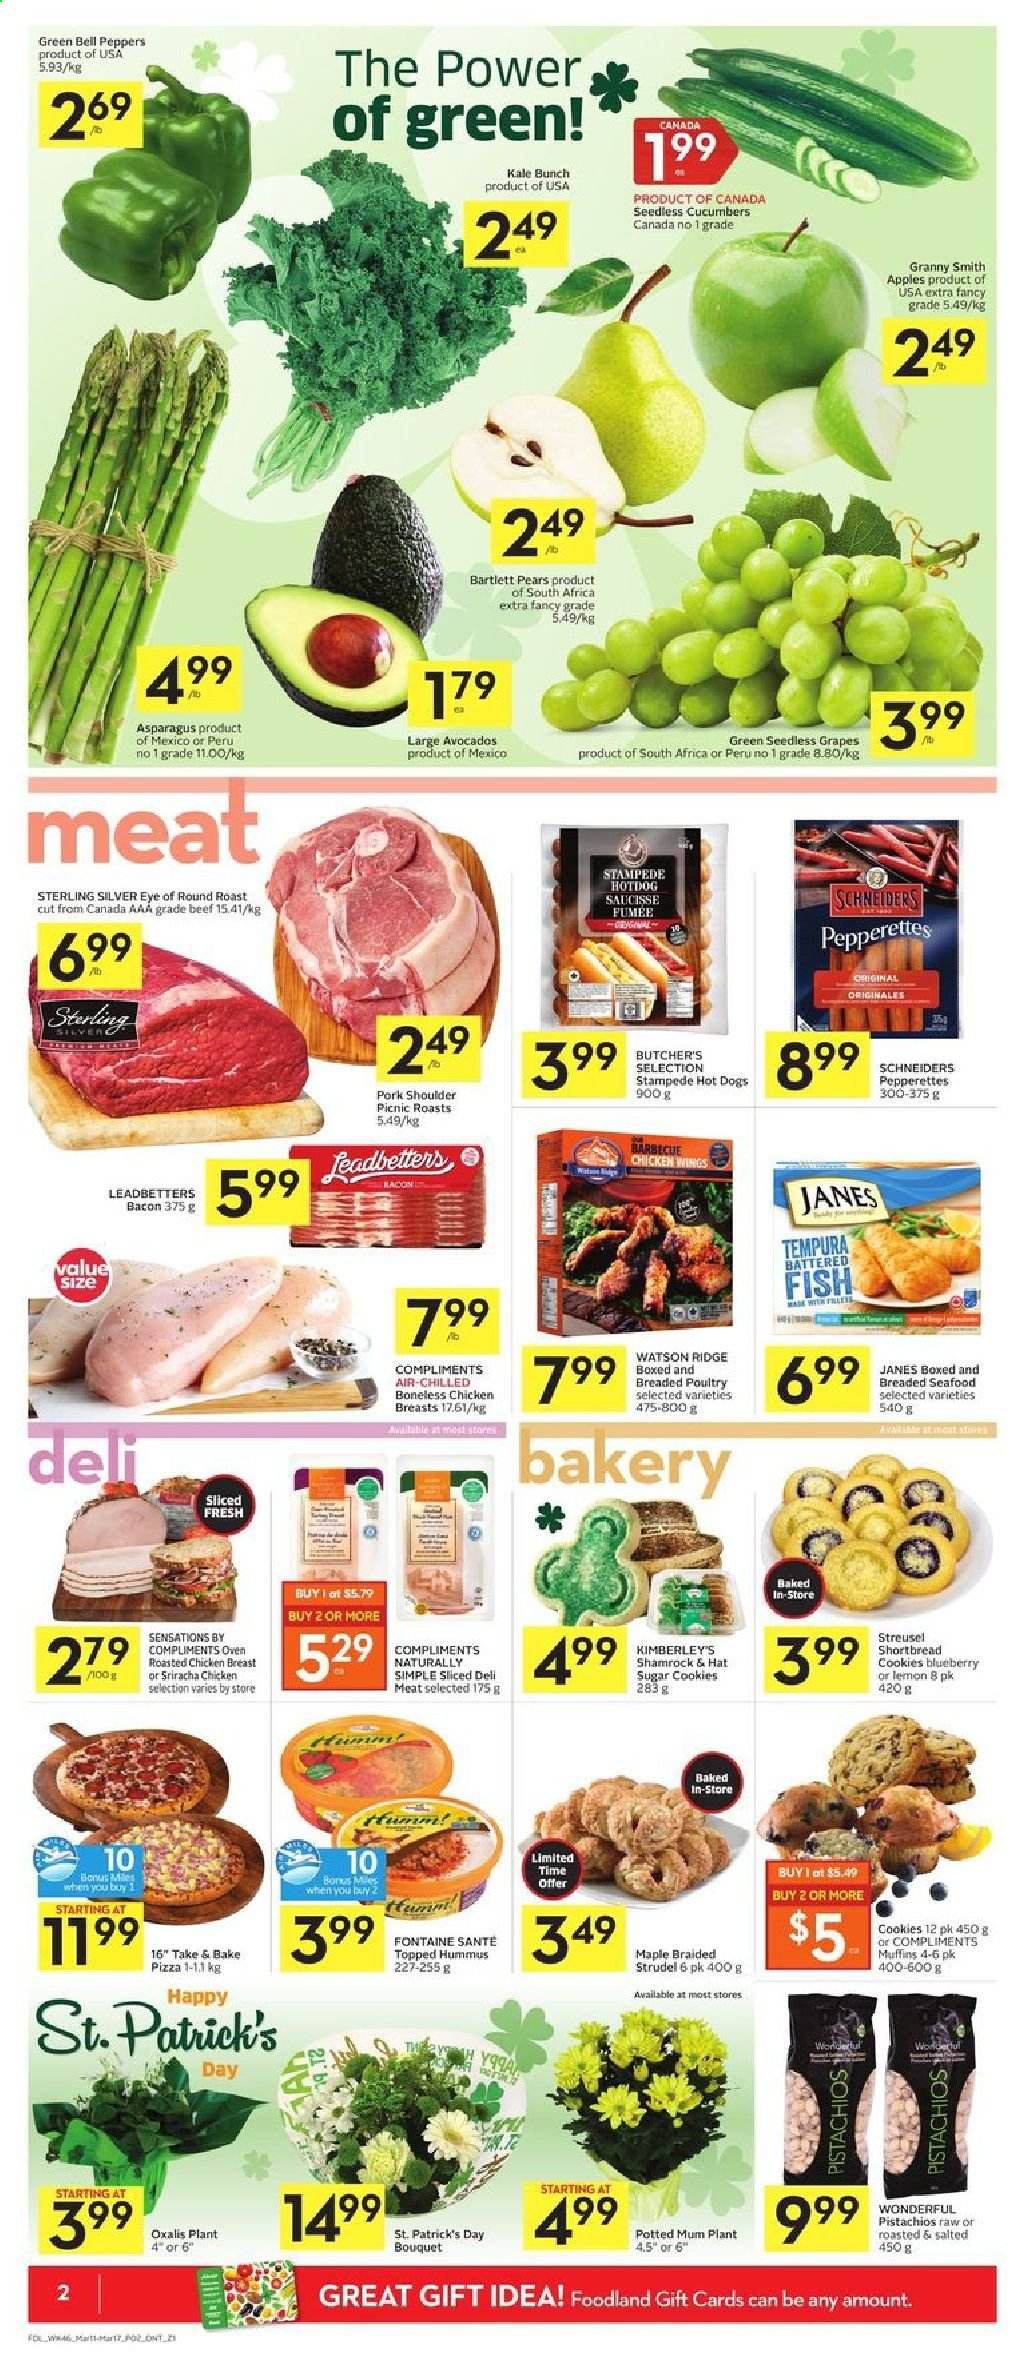 thumbnail - Foodland Flyer - March 11, 2021 - March 17, 2021 - Sales products - hot dog rolls, strudel, muffin, asparagus, bell peppers, cucumber, kale, peppers, apples, avocado, Bartlett pears, grapes, seedless grapes, pears, Granny Smith, seafood, fish, hot dog, pizza, chicken roast, bacon, hummus, chicken wings, cookies, sriracha, pistachios, chicken, beef meat, eye of round, round roast, pork meat, pork shoulder. Page 4.